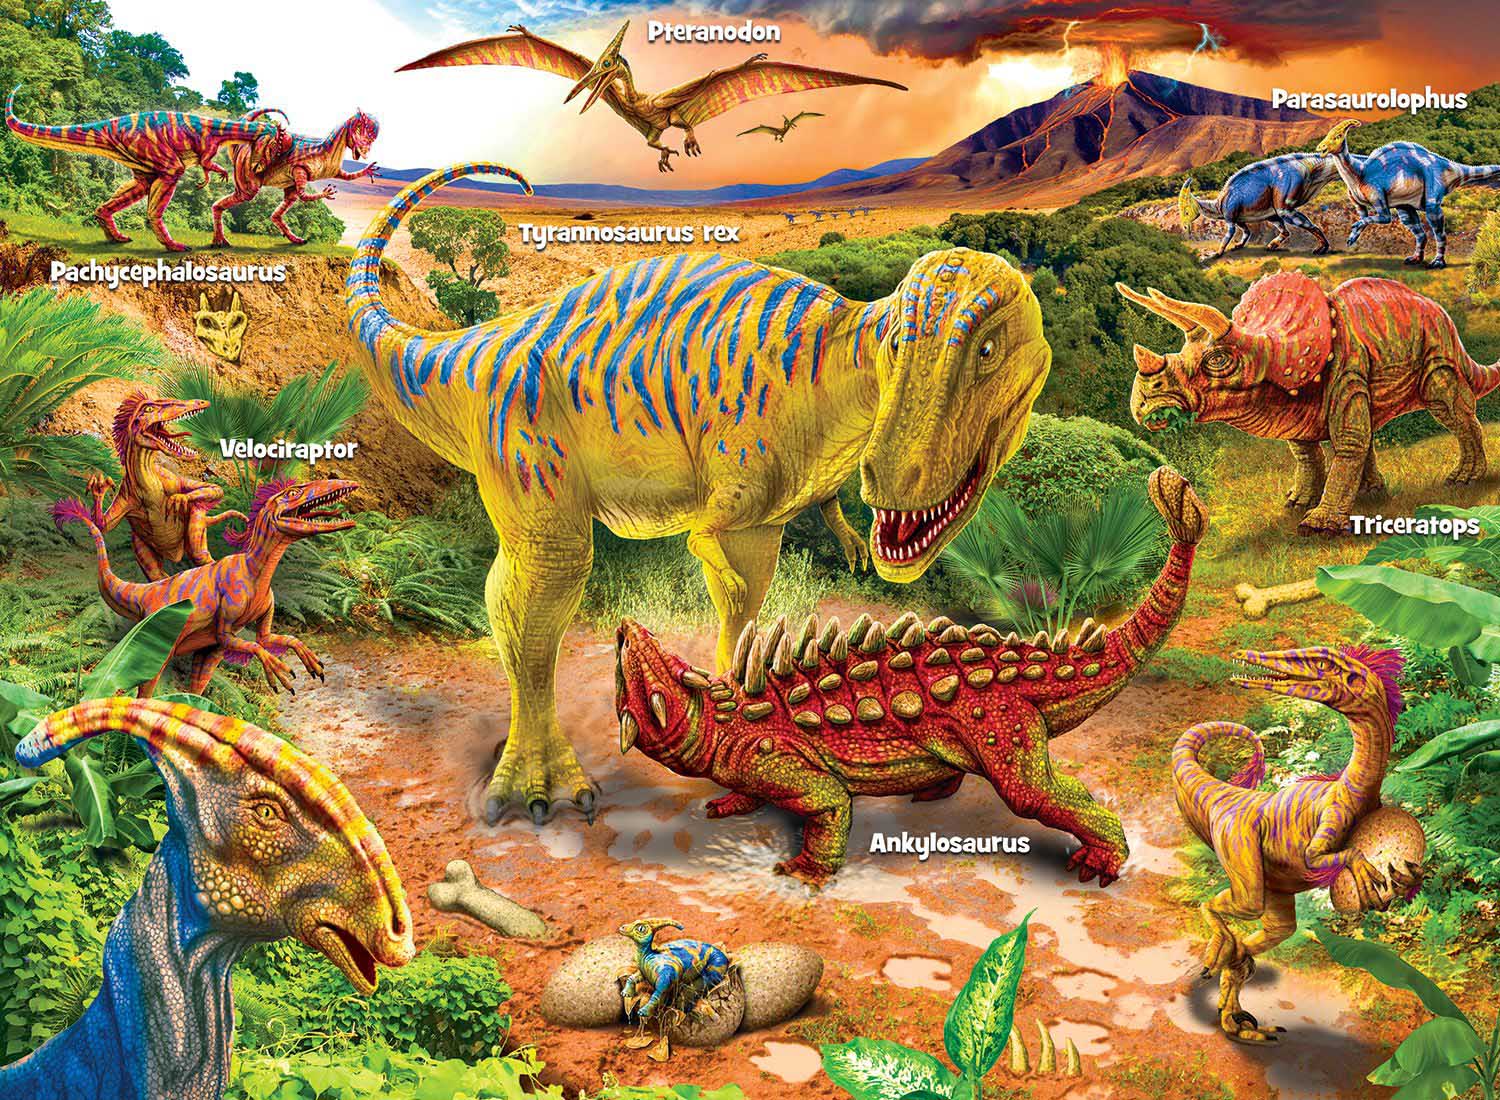 Puzzles for Adults 6000 Piece Strong Dinosaur Every Piece is Unique & Pieces Fit Together Perfectly